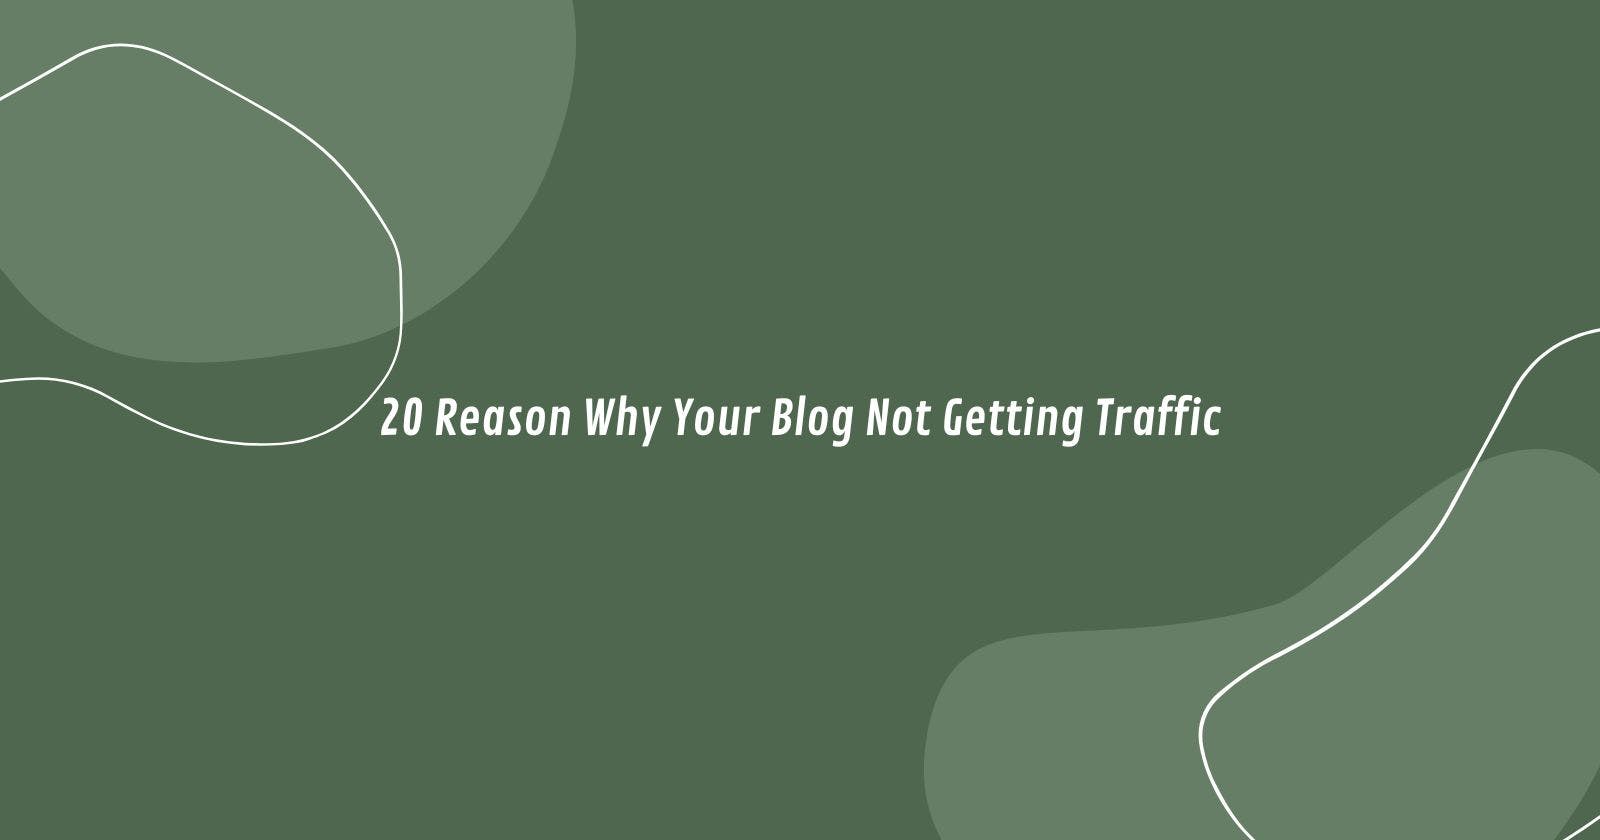 20 Reason Why Your Blog Not Getting Traffic